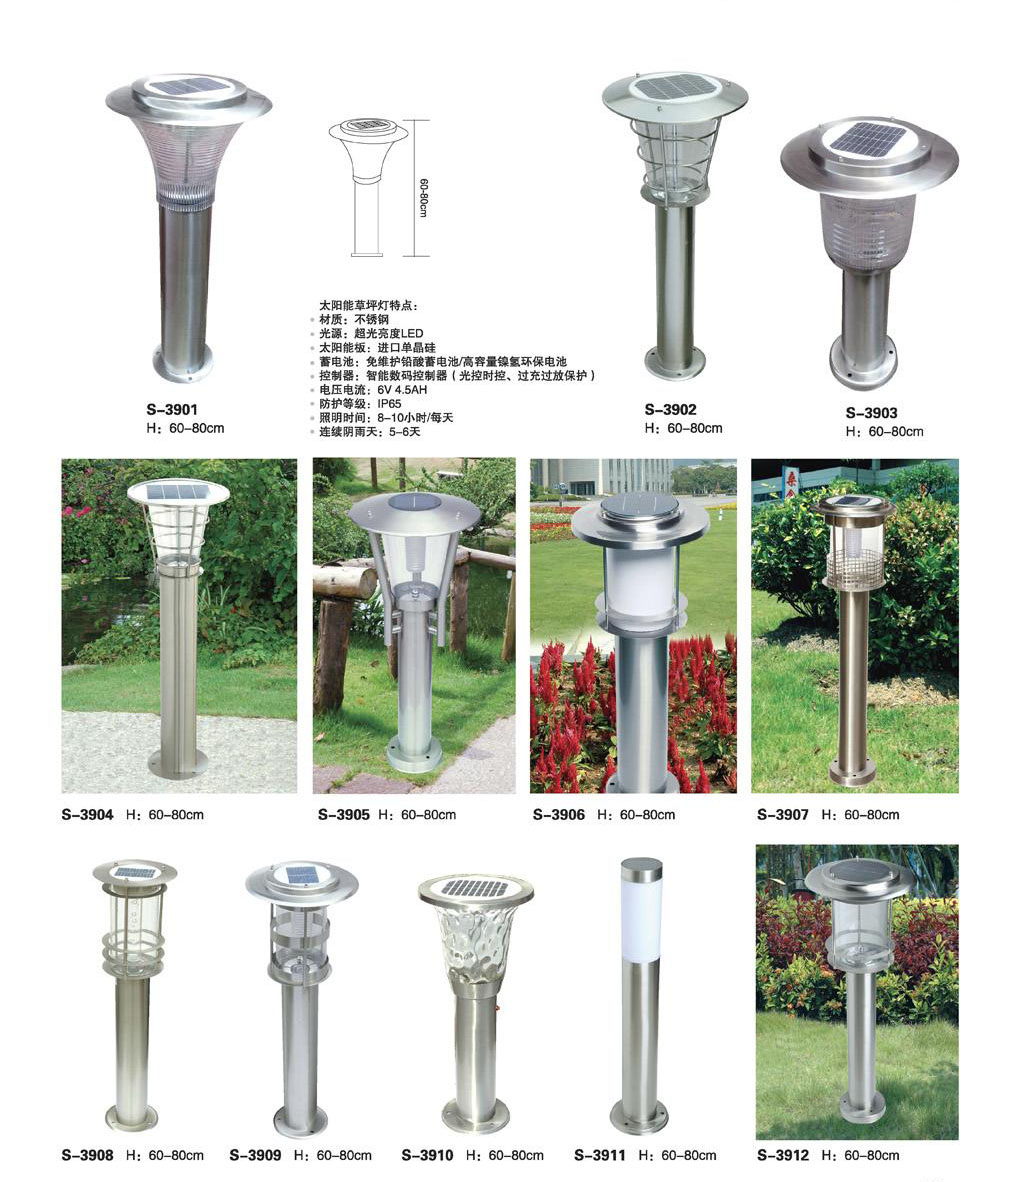 Stainless steel solar lawn lamp